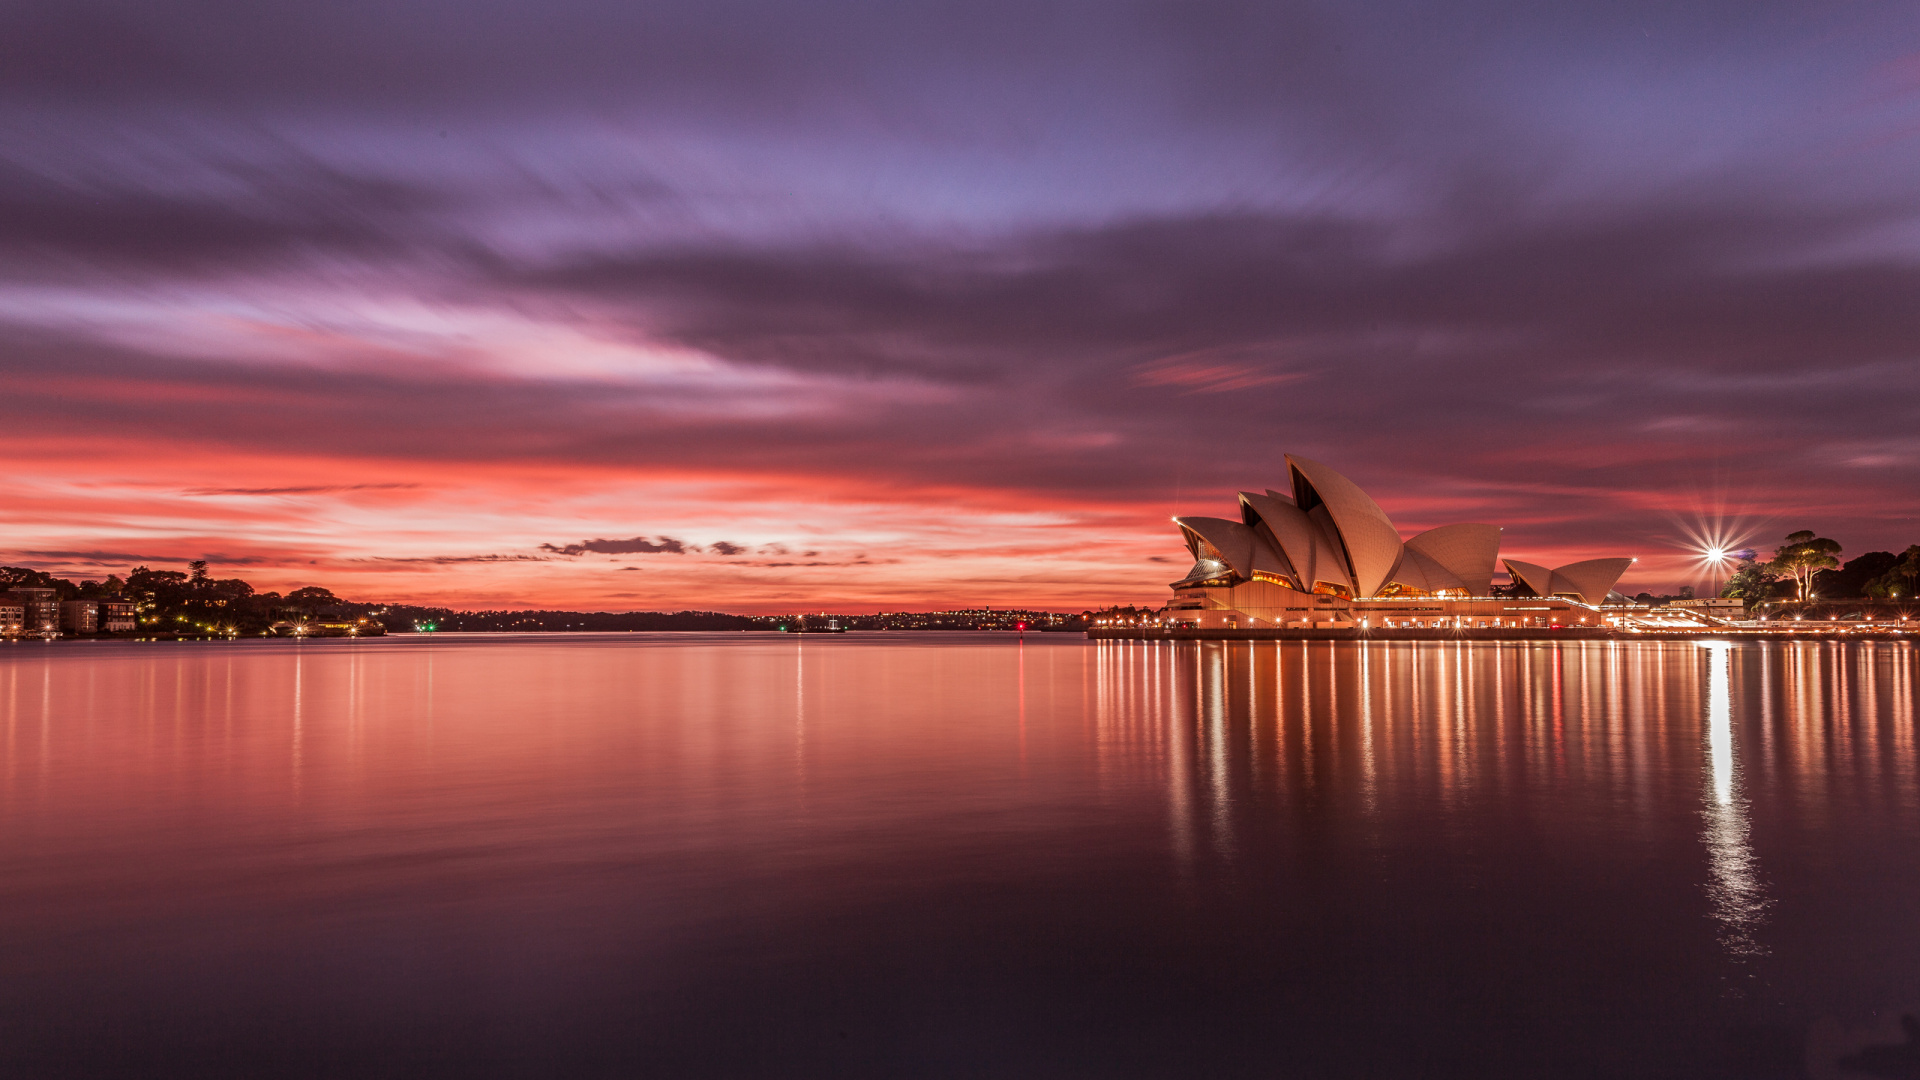 Sydney Opera House During Sunset. Wallpaper in 1920x1080 Resolution